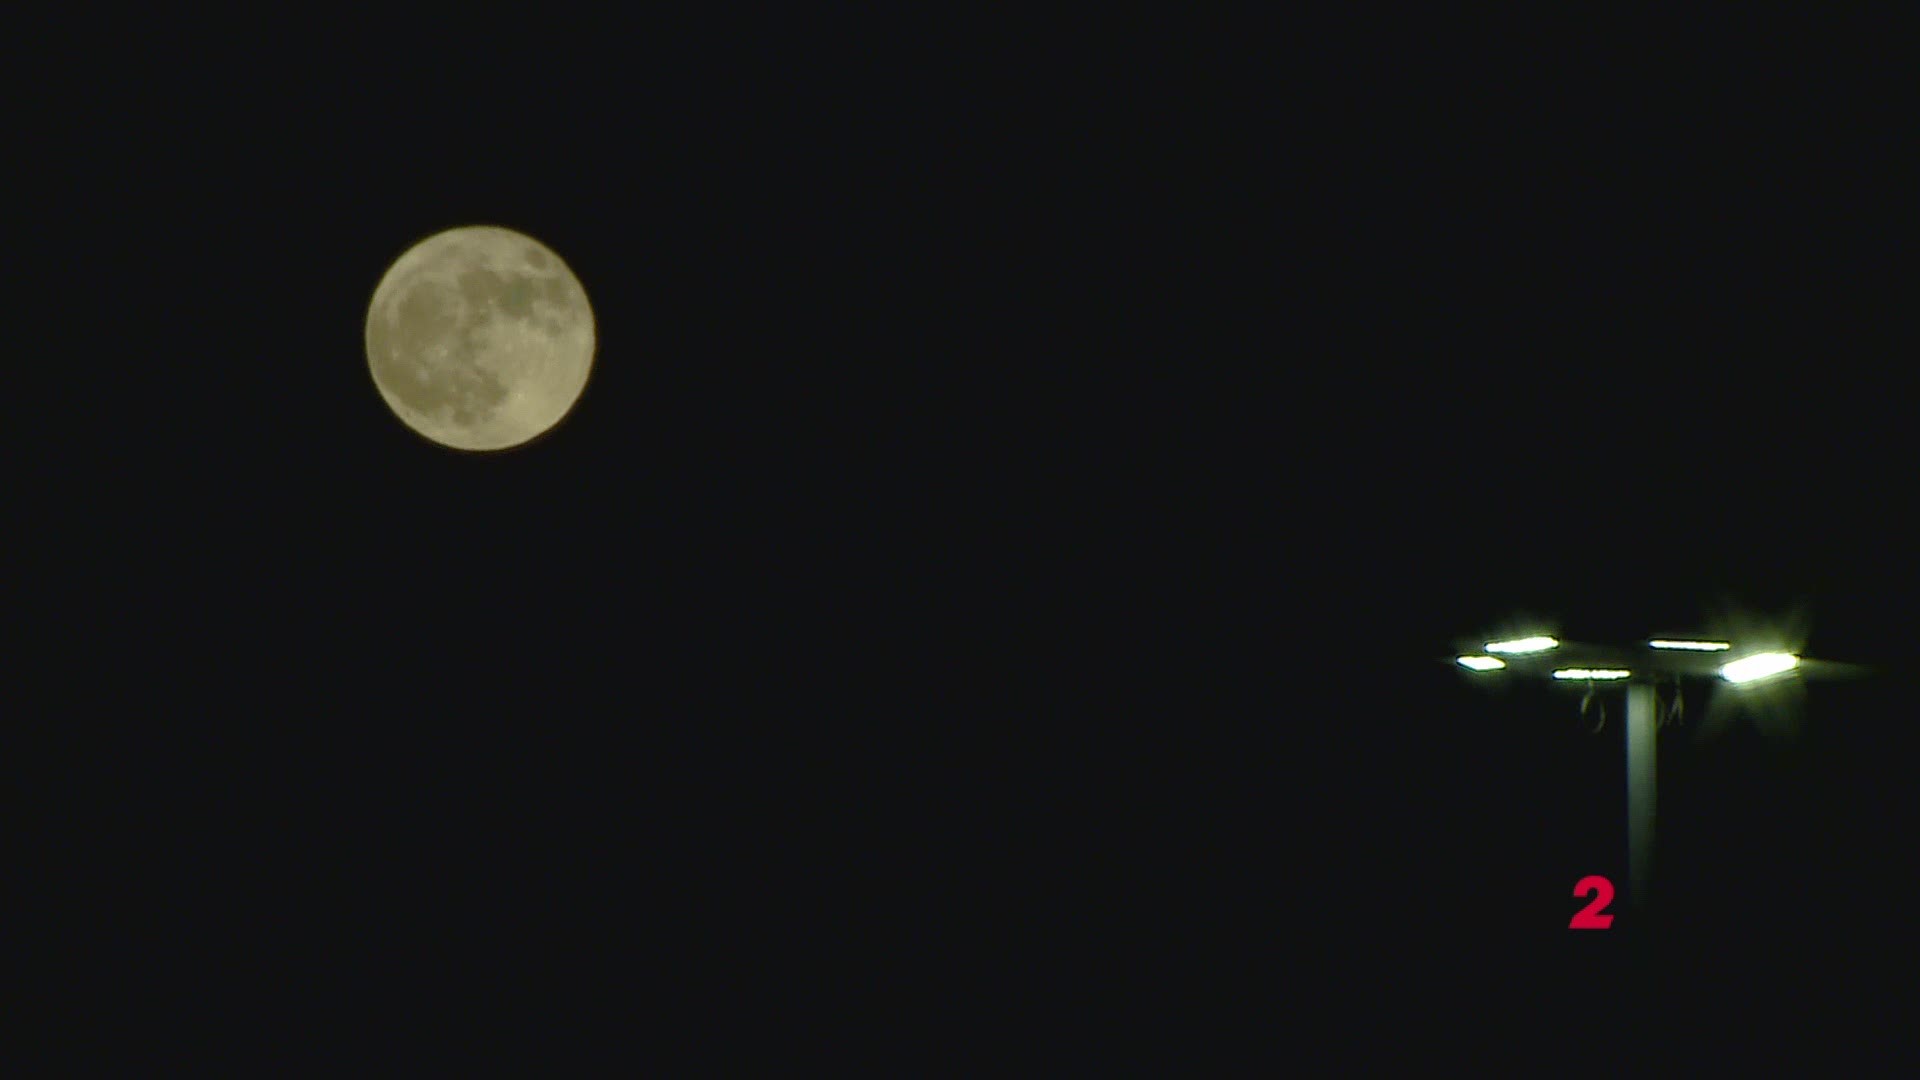 WFMY's Brian Hall captured this video of a full moon over Greensboro amid Halloween. Check it out!